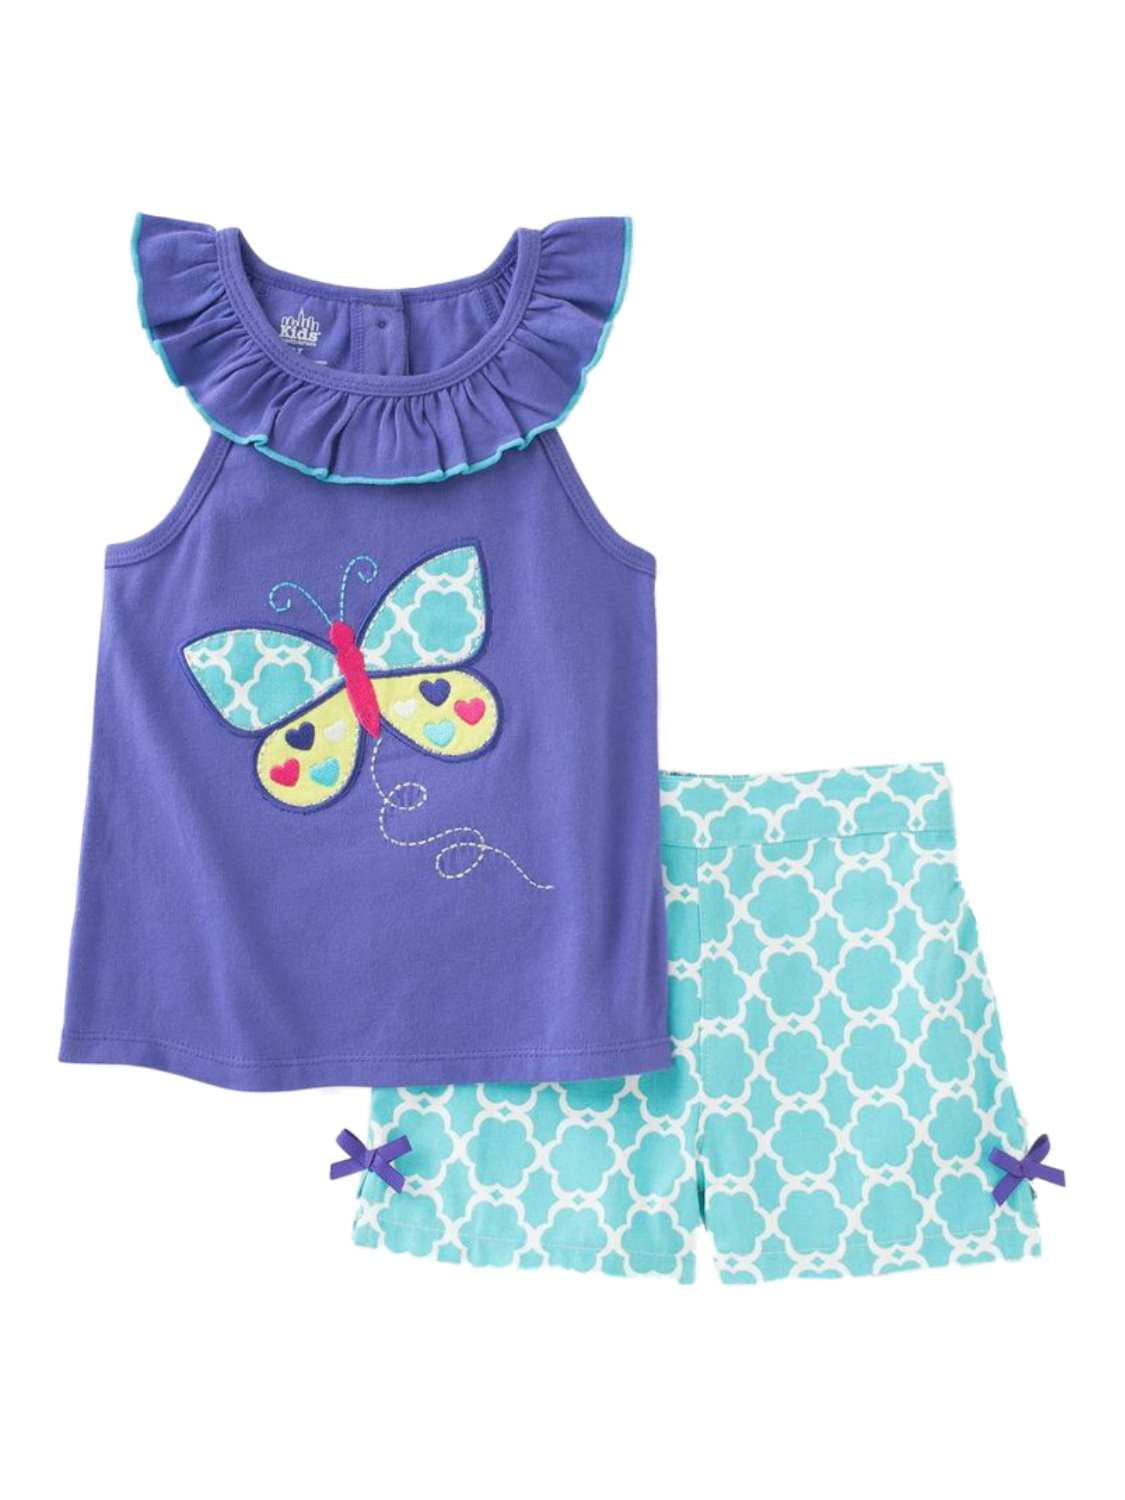 4 Preemie and Newborn Sizes Adorable Dog and Butterfly Shirt and Pants Outfit 